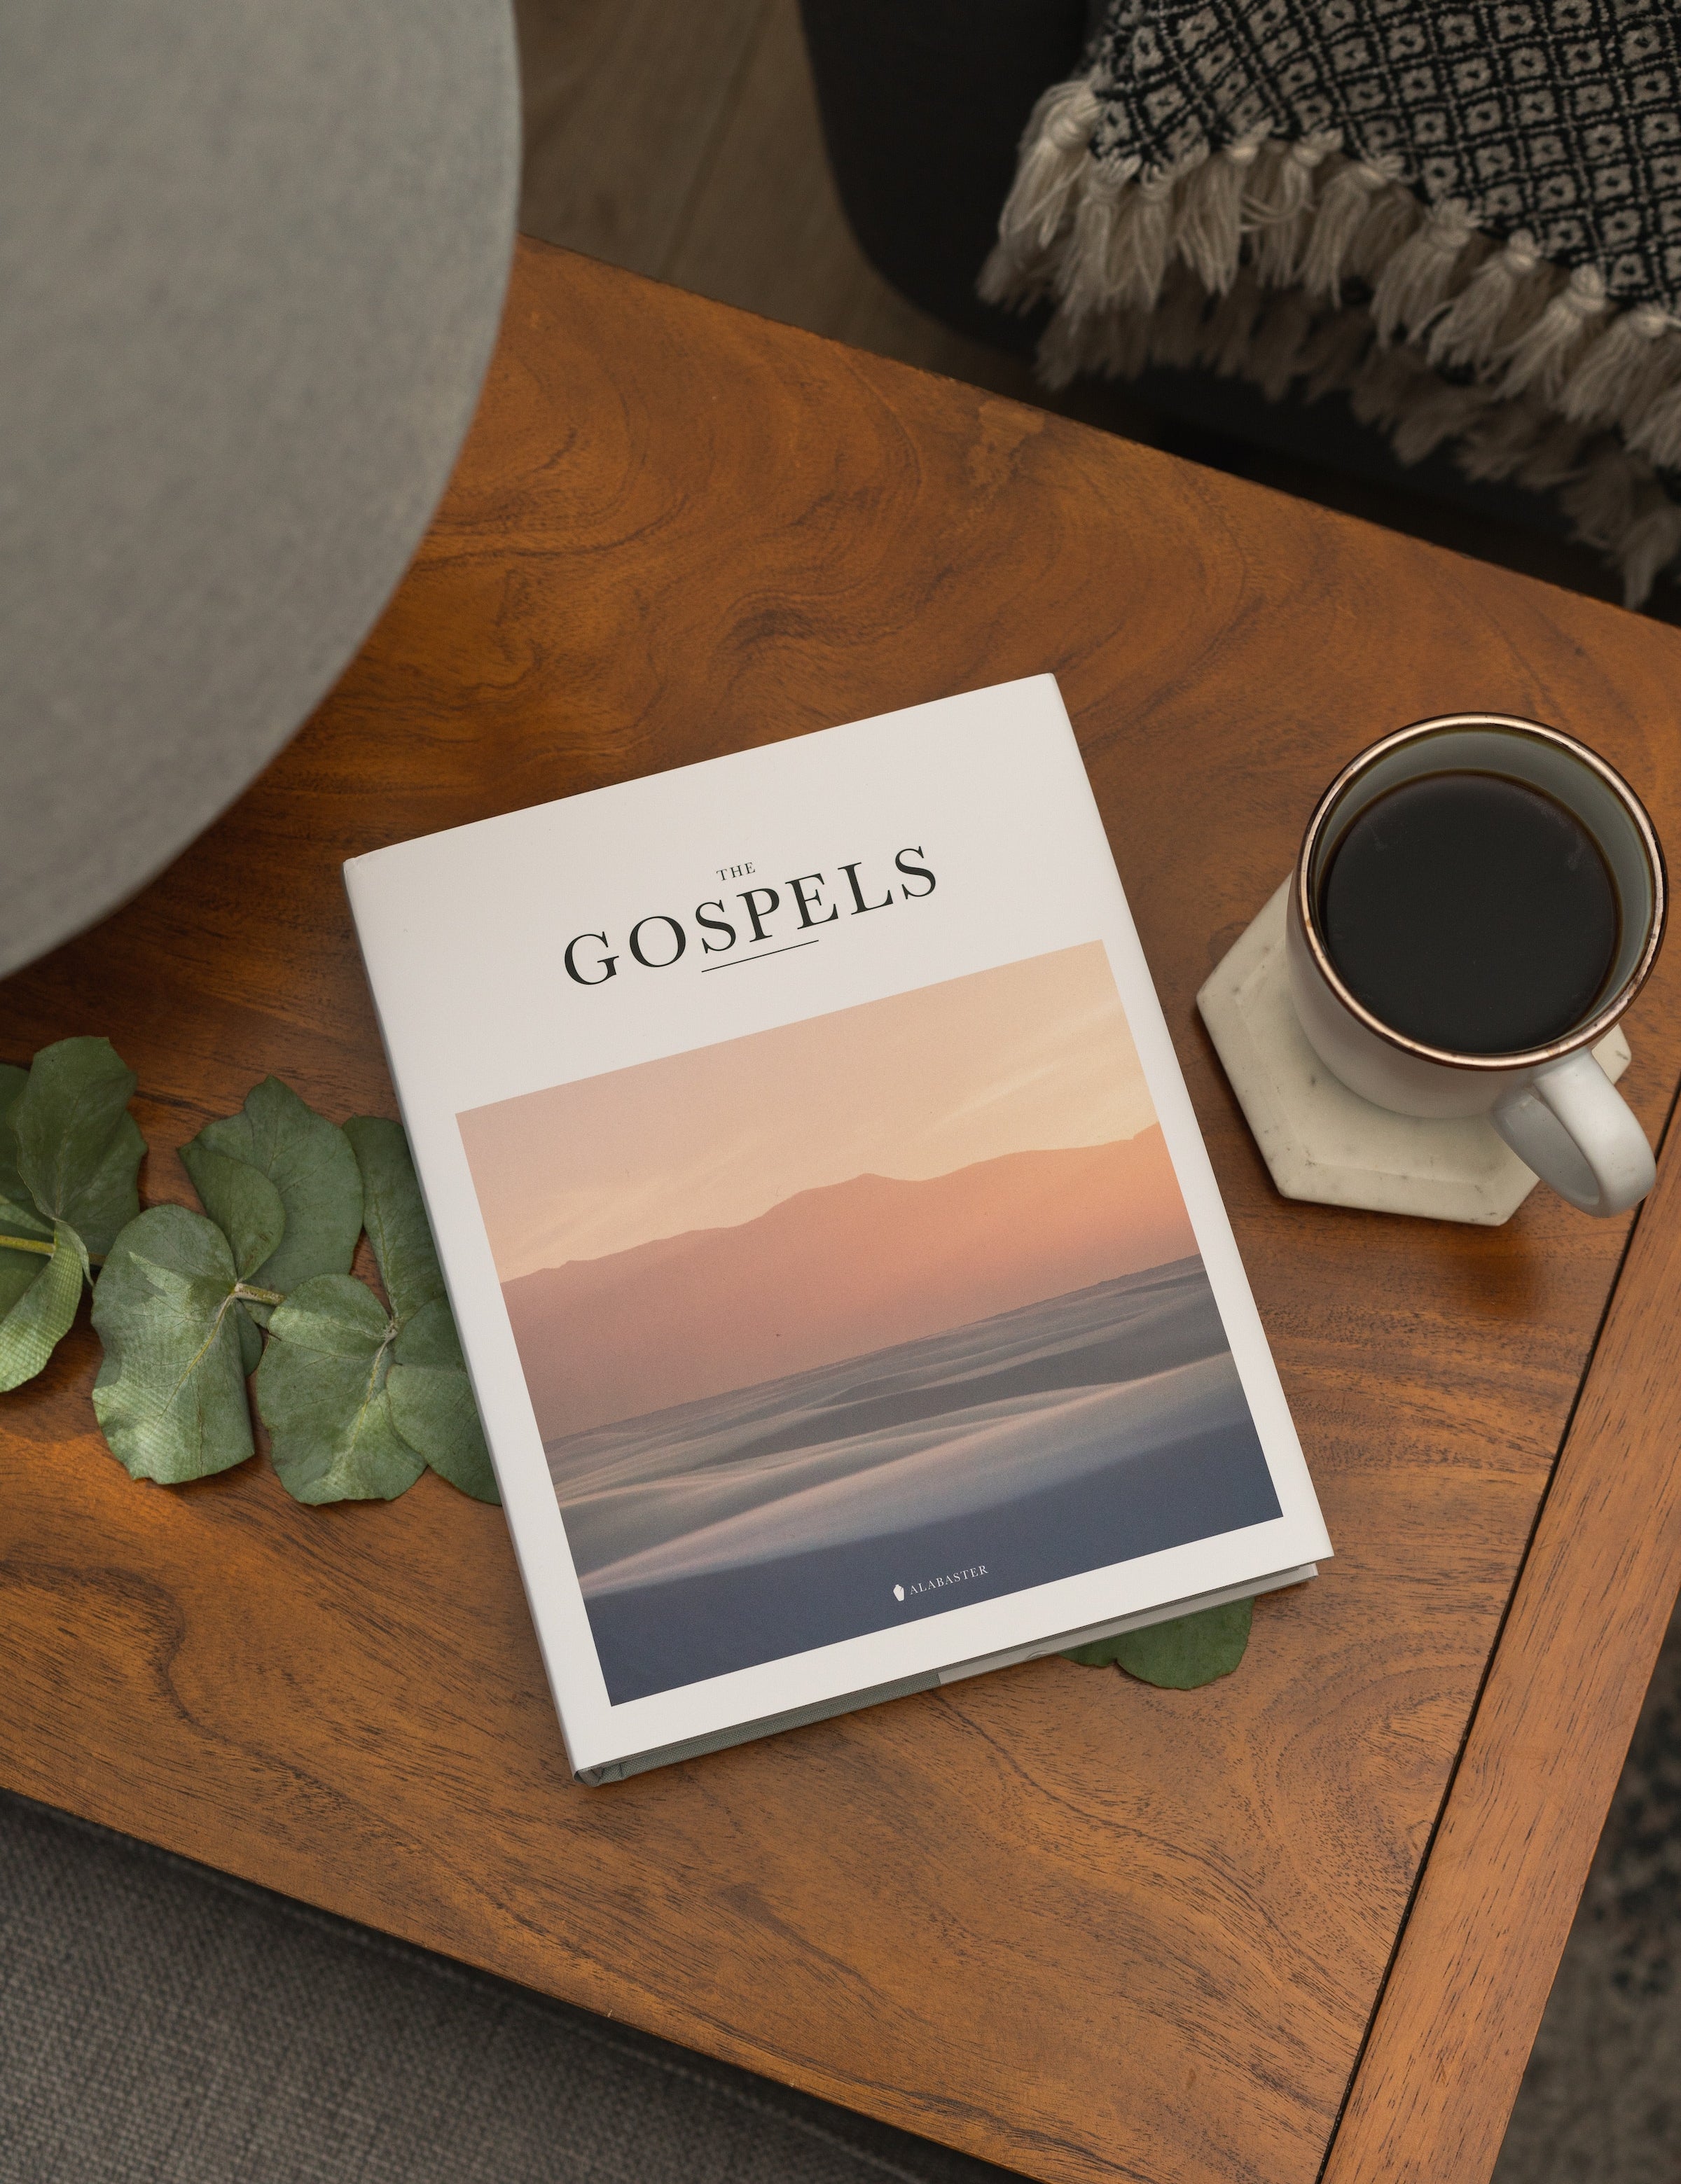 Alabaster's Gospels Hardcover on a coffee table by a cup of coffee